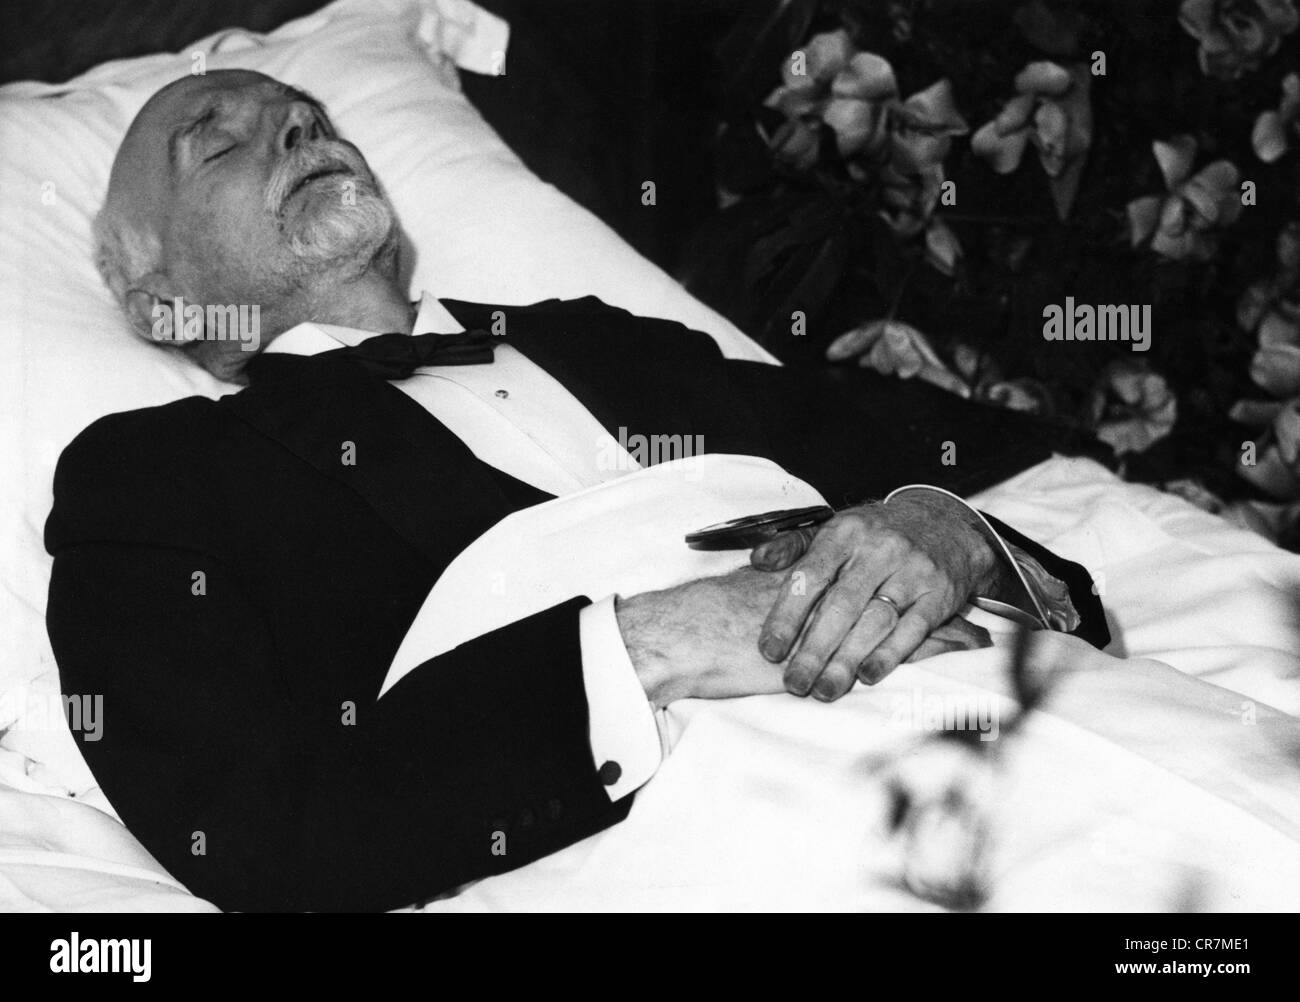 Venizelos, Eleftherios, 23.8.1864 - 18.3.1936, Greek politician, death, layed out in Paris, March 1936, , Stock Photo